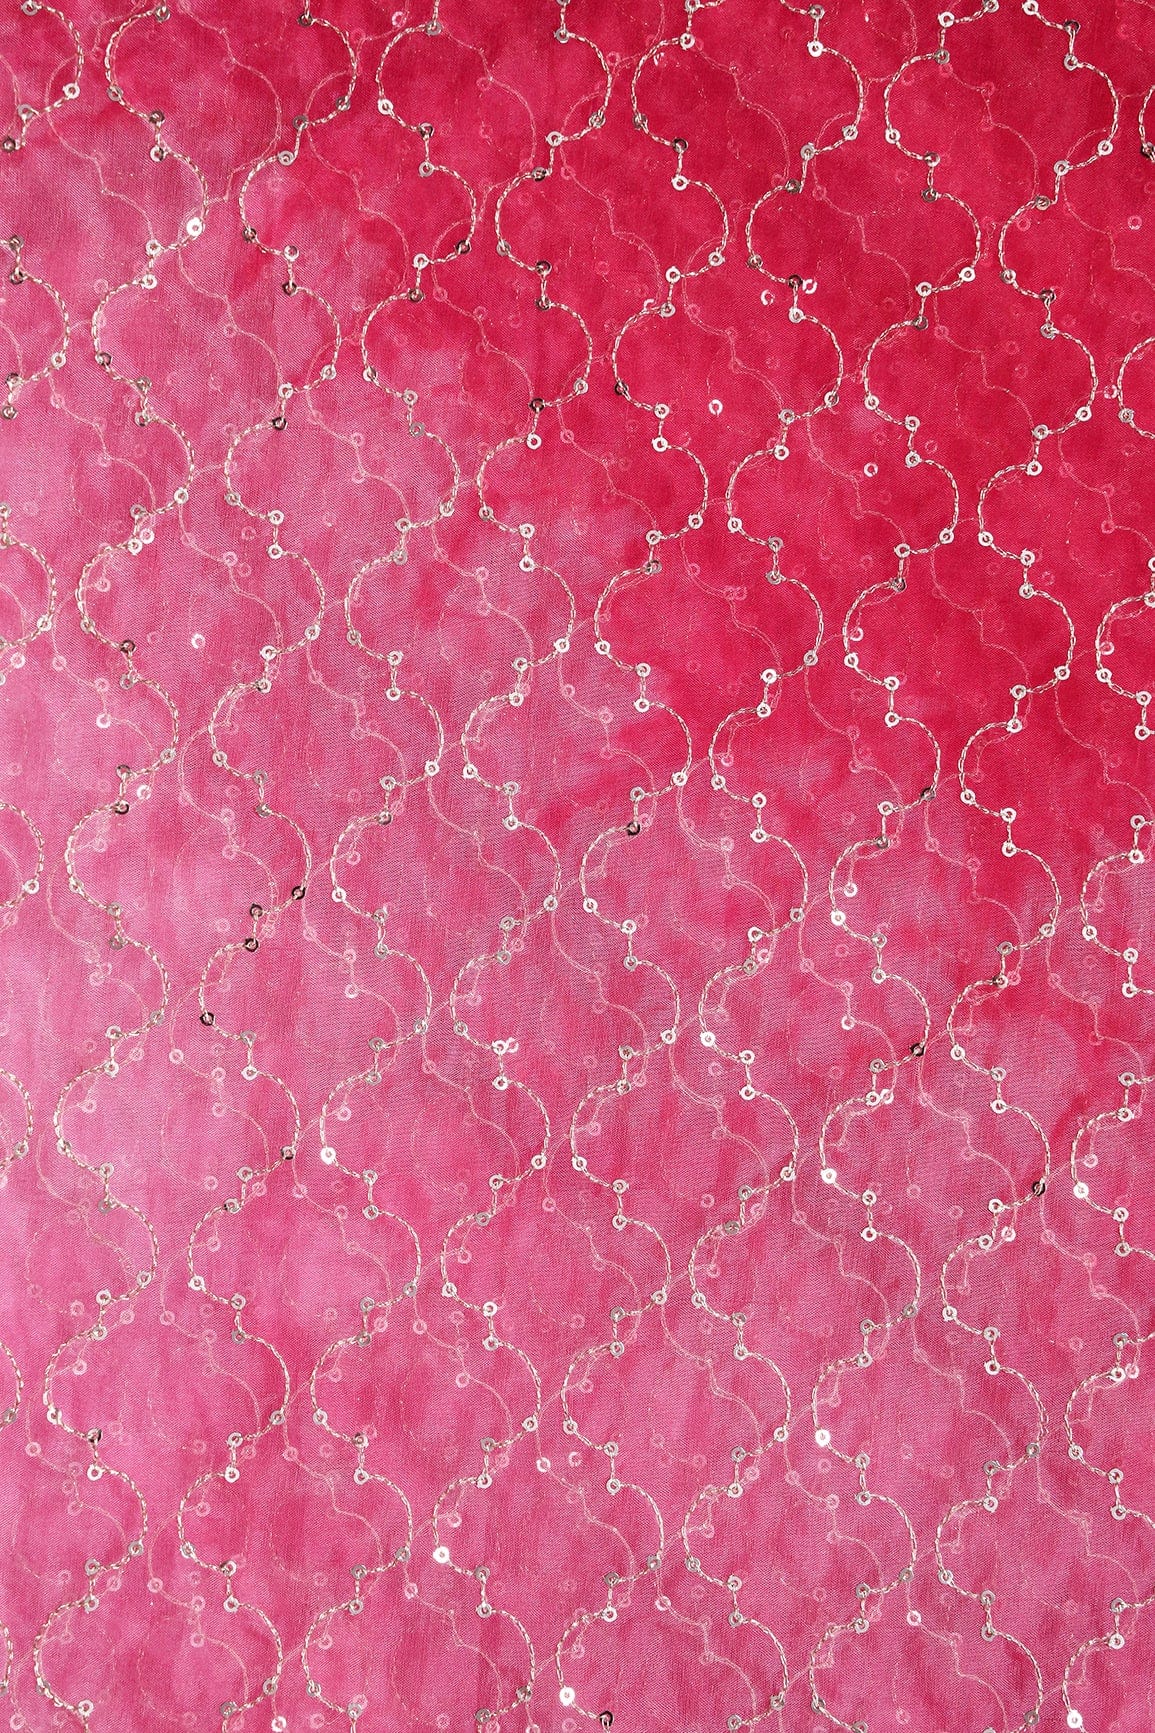 doeraa Embroidery Fabrics Gold Sequins With Gold Zari Trellis Embroidery Work On Tie & Dye Red Organza Fabric